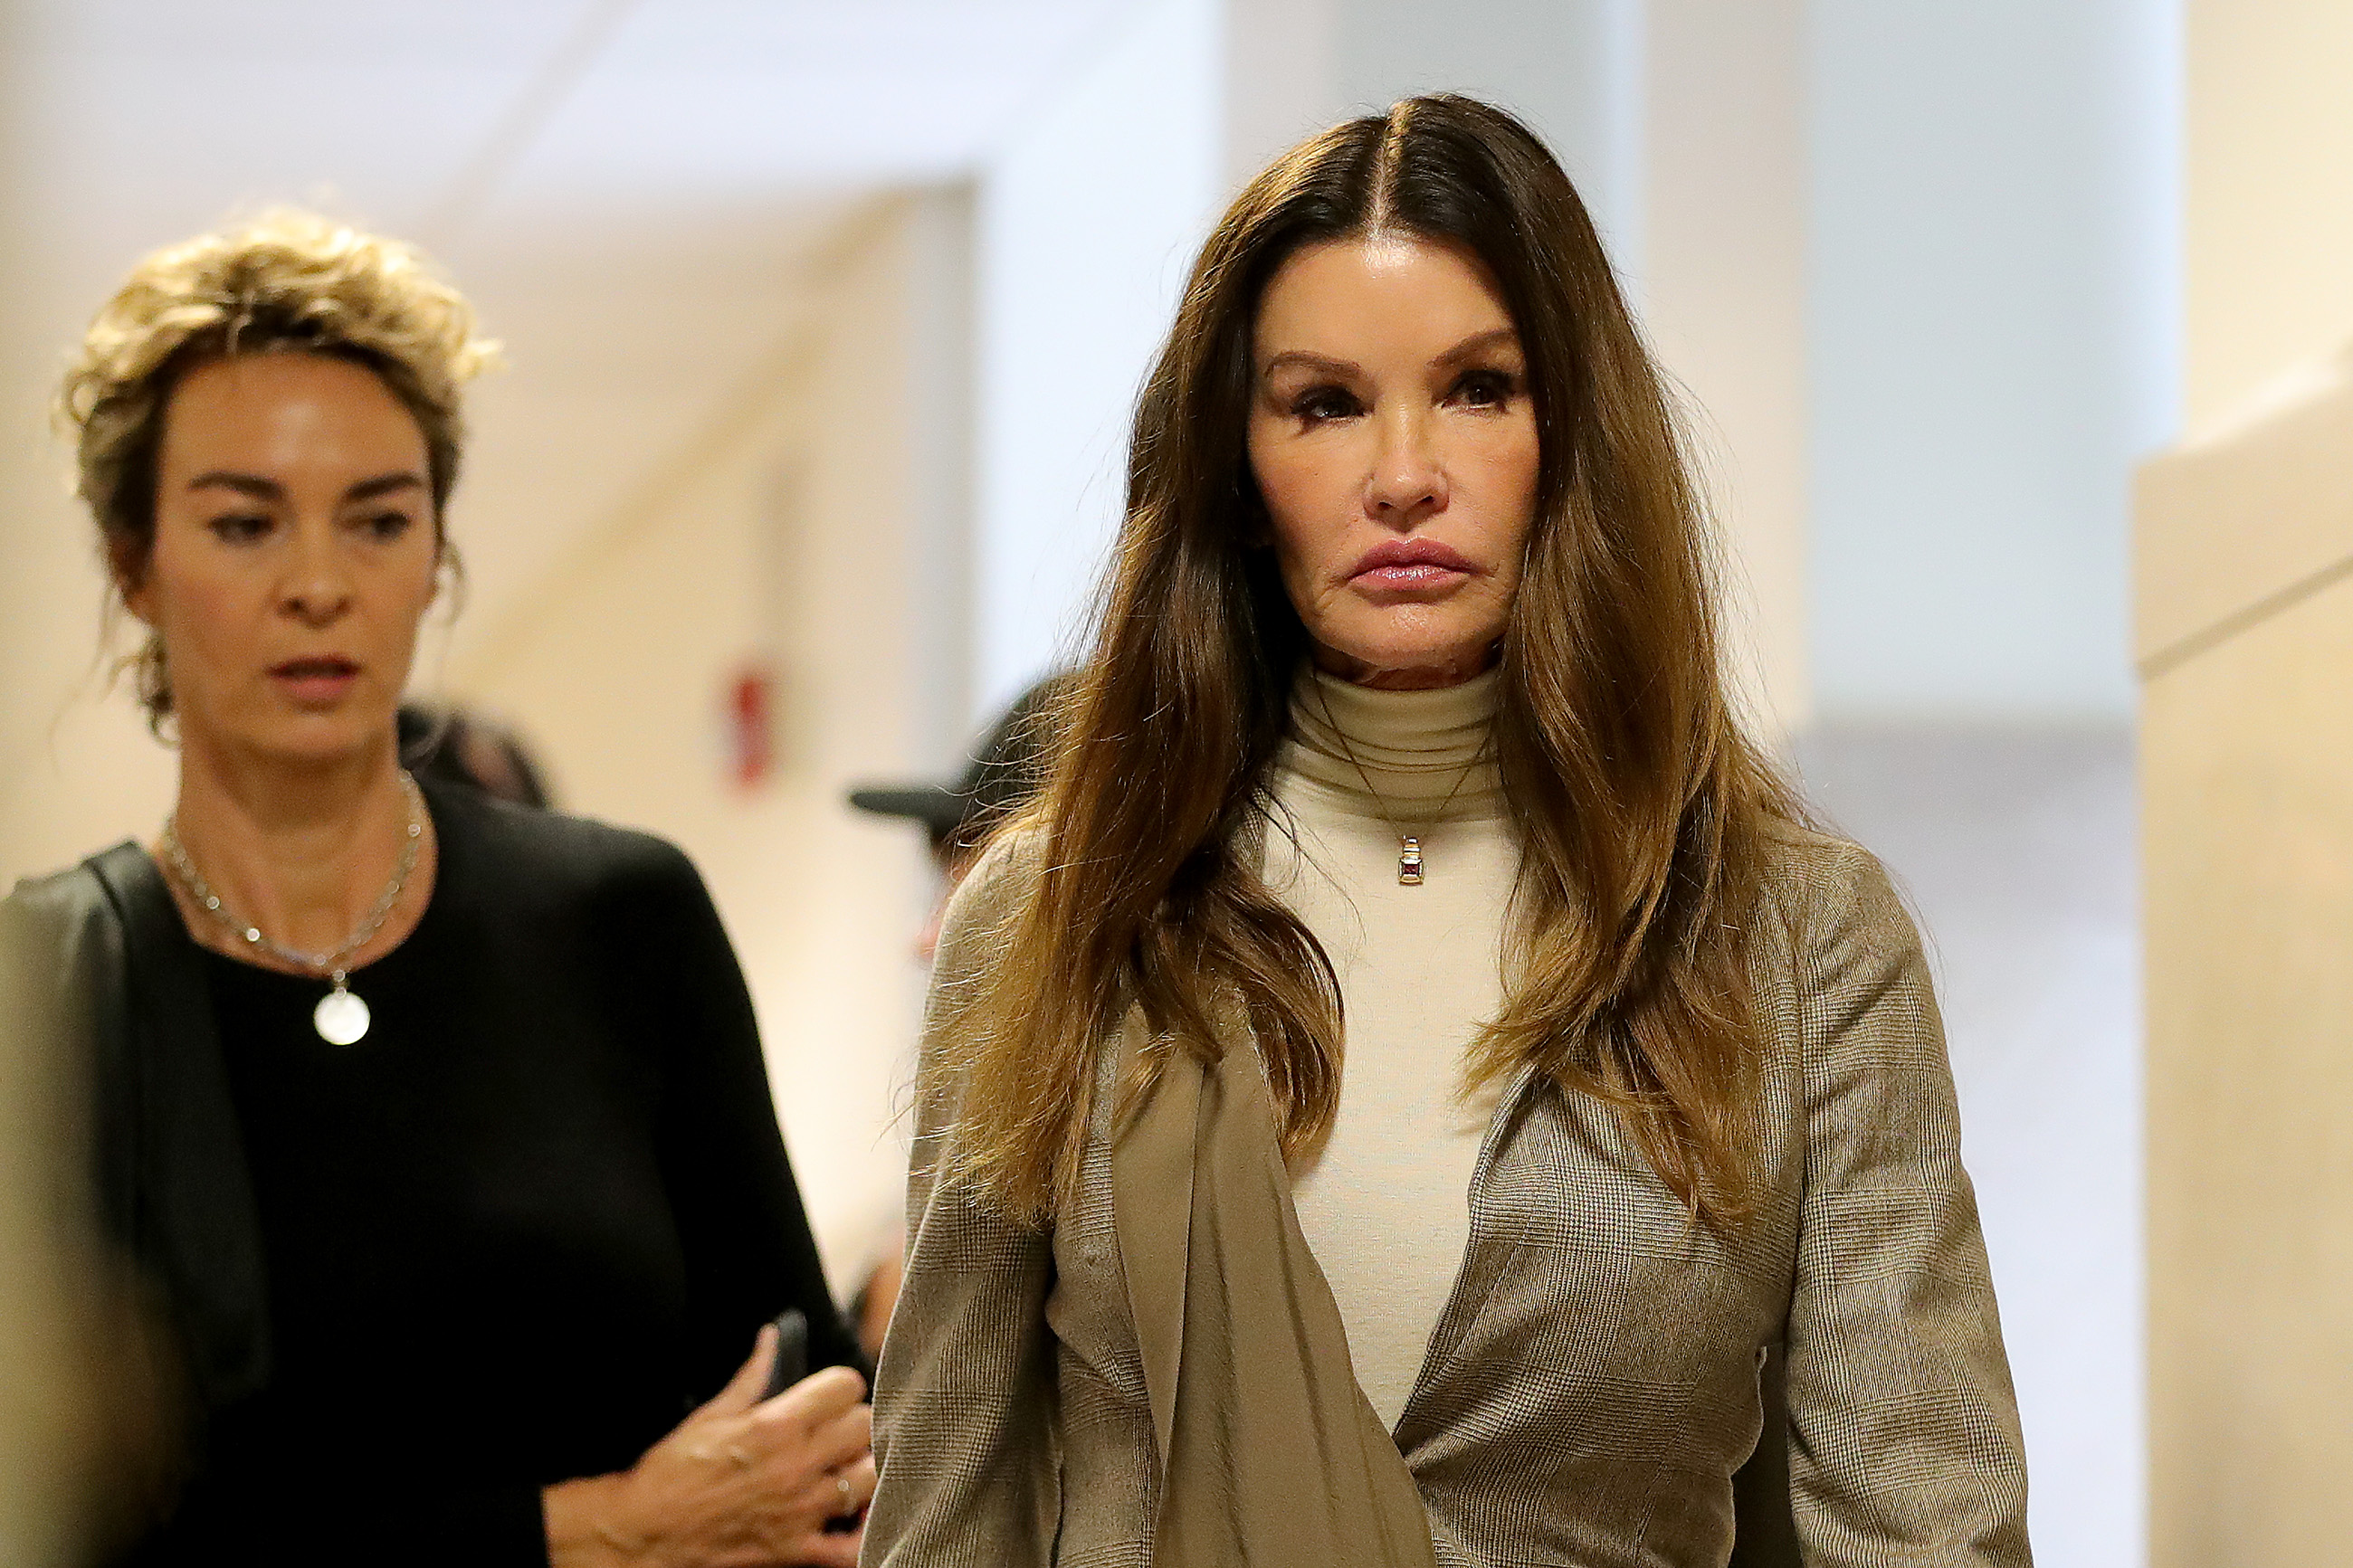 Former model Janice Dickinson arrives at the sentencing hearing for the sexual assault trial of entertainer Bill Cosby at the Montgomery County Courthouse in Norristown, Pennsylvania on September 24, 2018. (Photo by David MAIALETTI / POOL / AFP) (DAVID MAIALETTI—AFP/Getty Images)